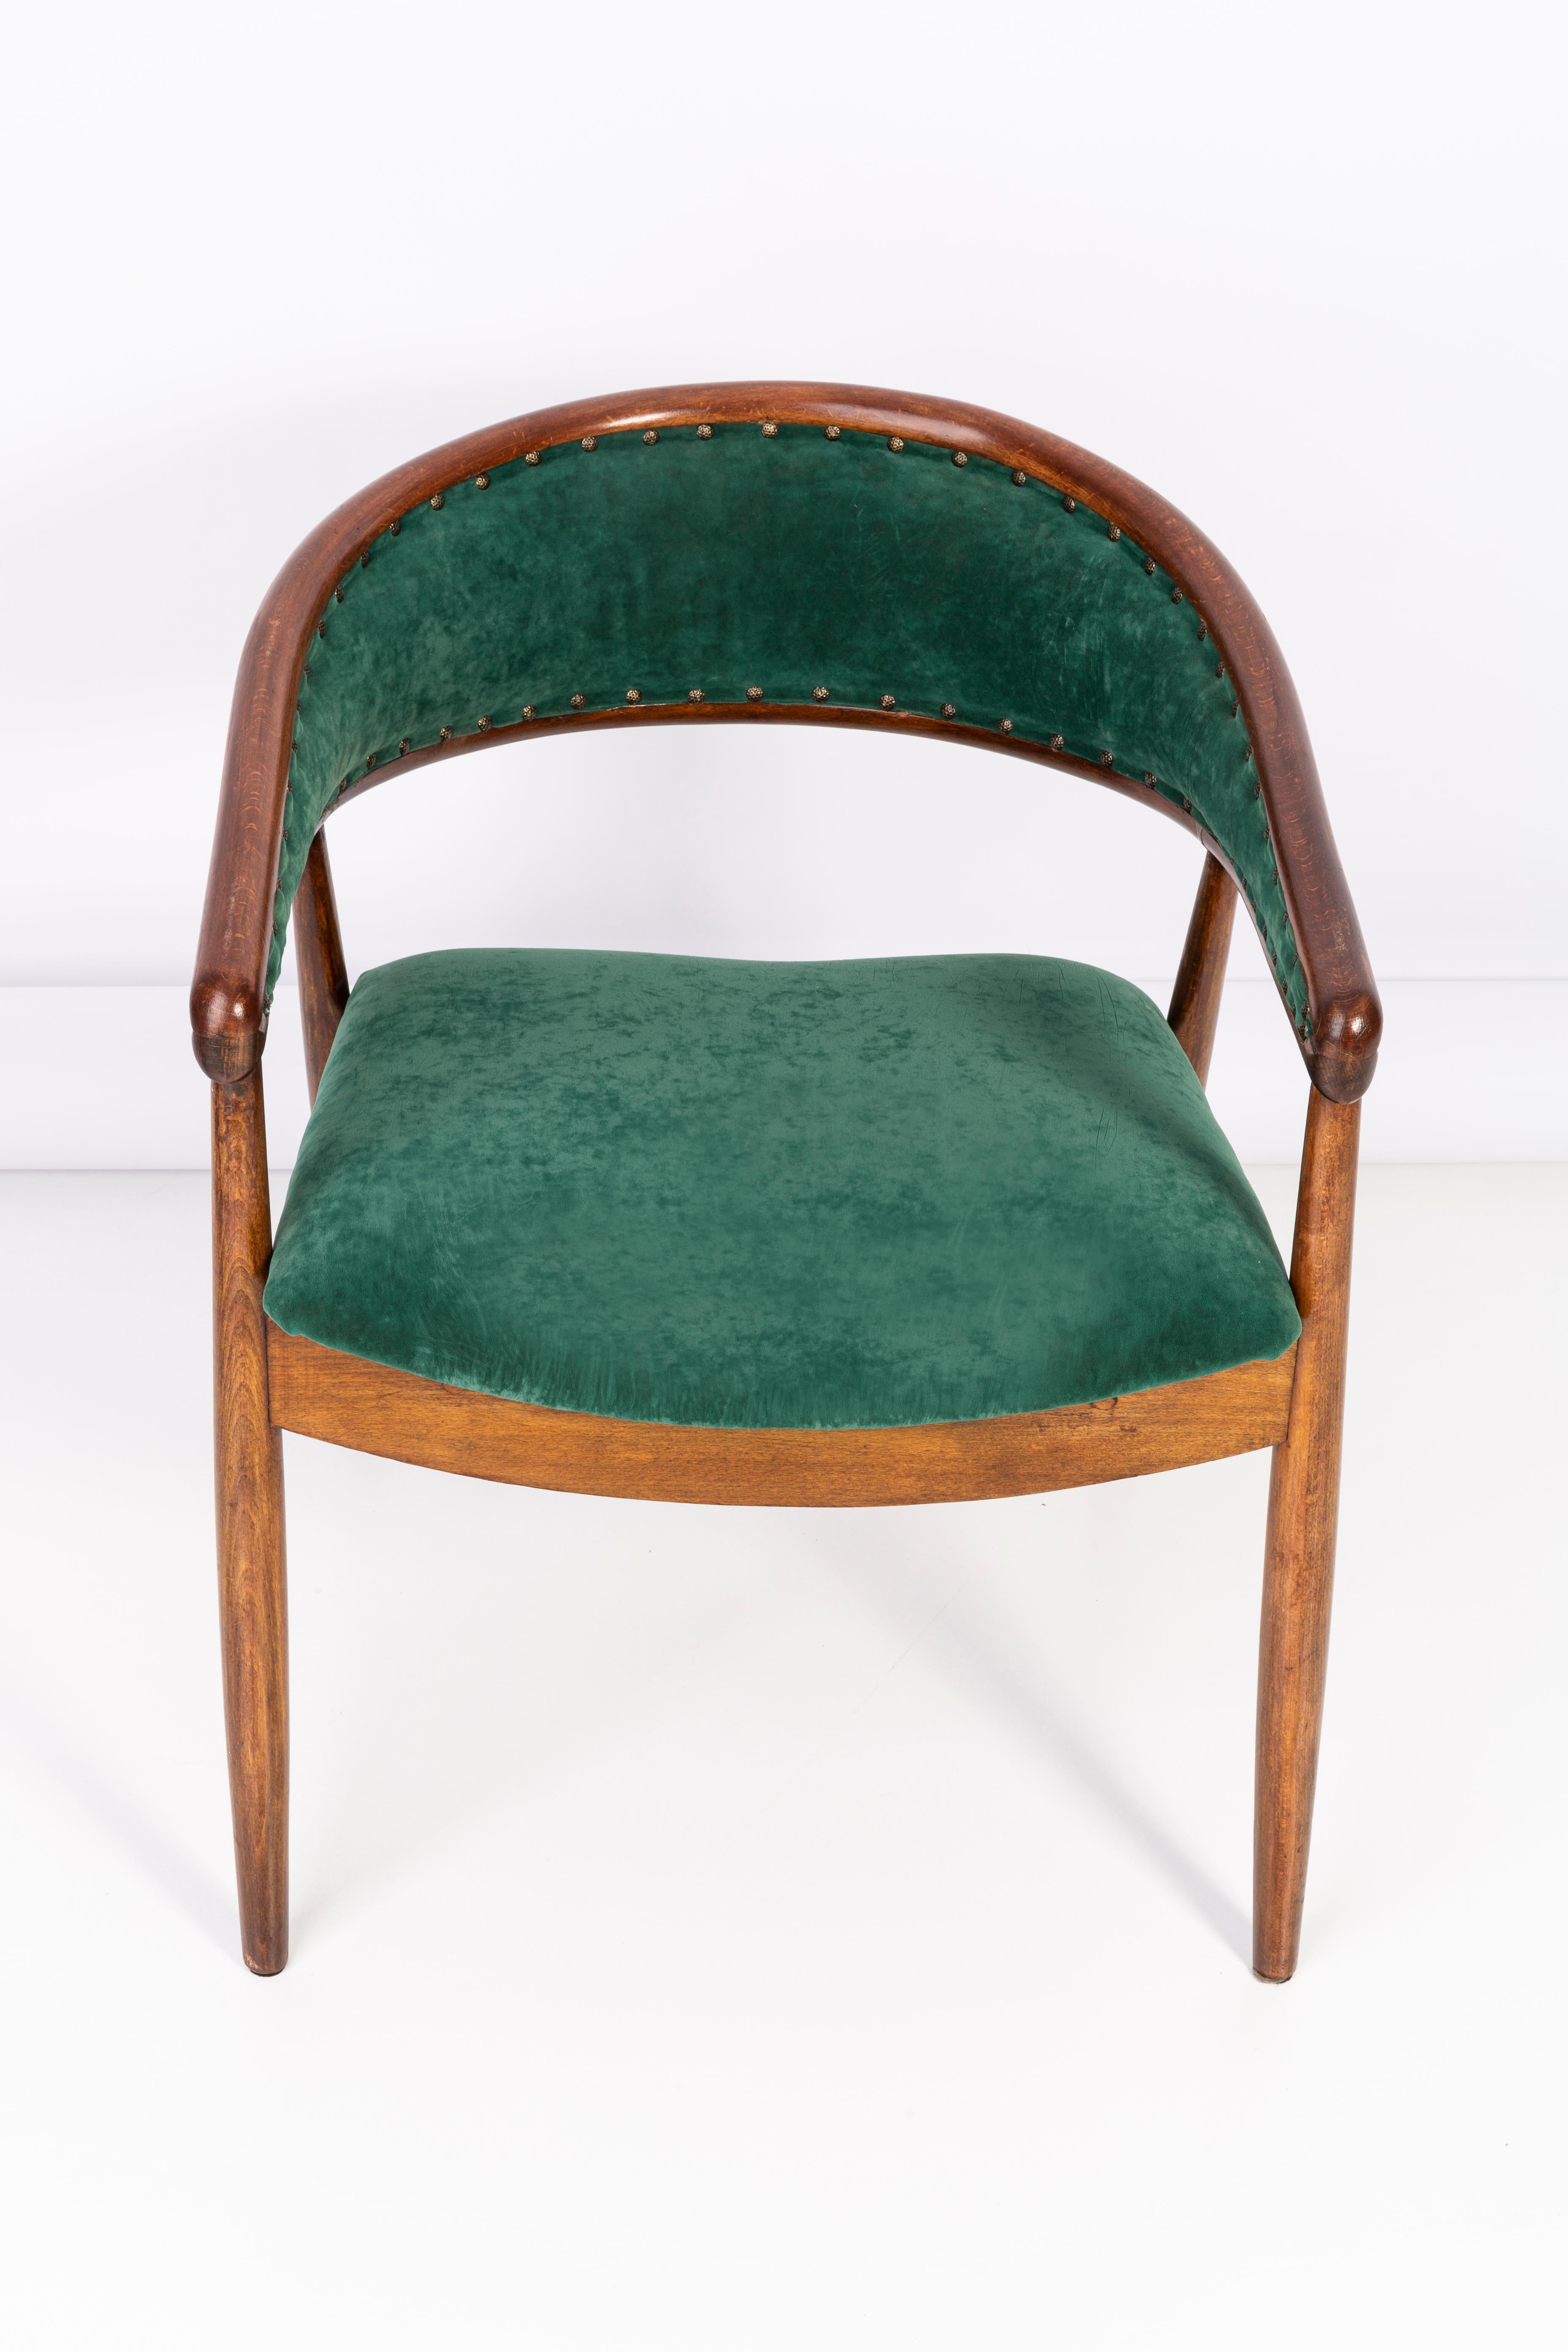 20th Century Set of Two James Mont Bent Beech Armchairs, Dark Green, B-3300 Type, 1960s For Sale